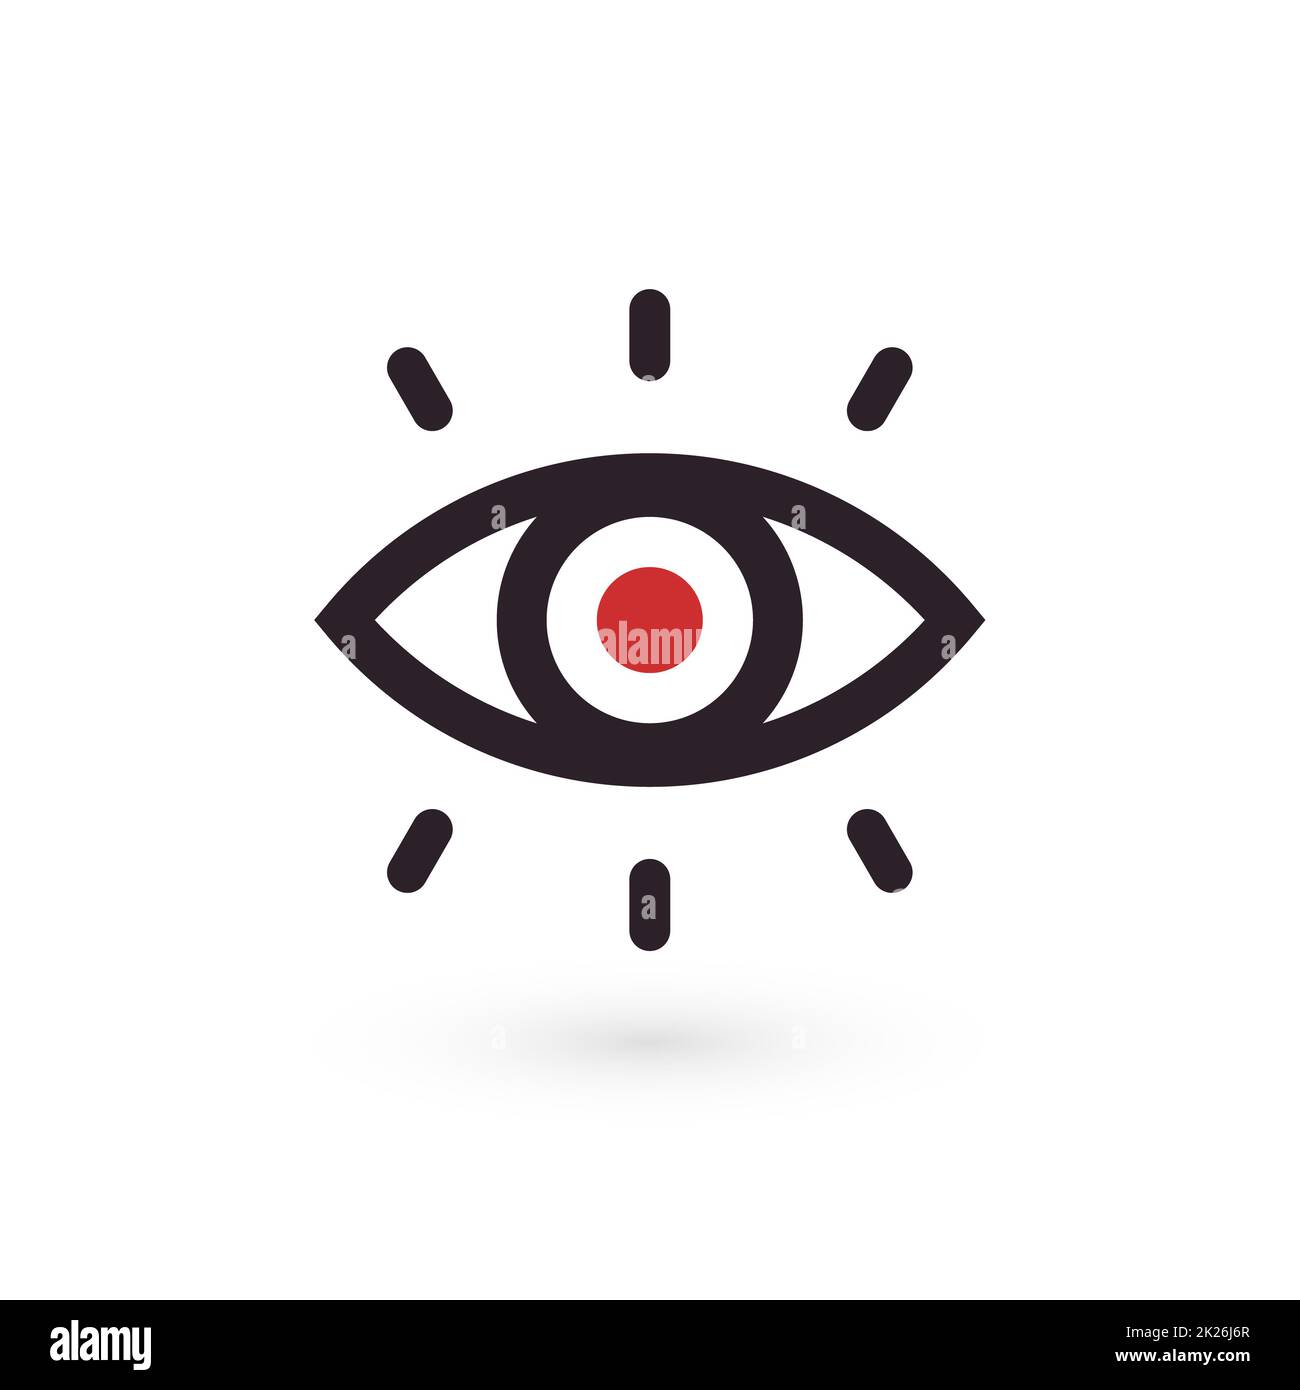 Eye outline icon, linear style, perfect for vision icon, eye surgery emblem, retina recognition tech logotype, optical innovative developments logo, CCTV system pictogram, idea symbol, vector. Stock Photo